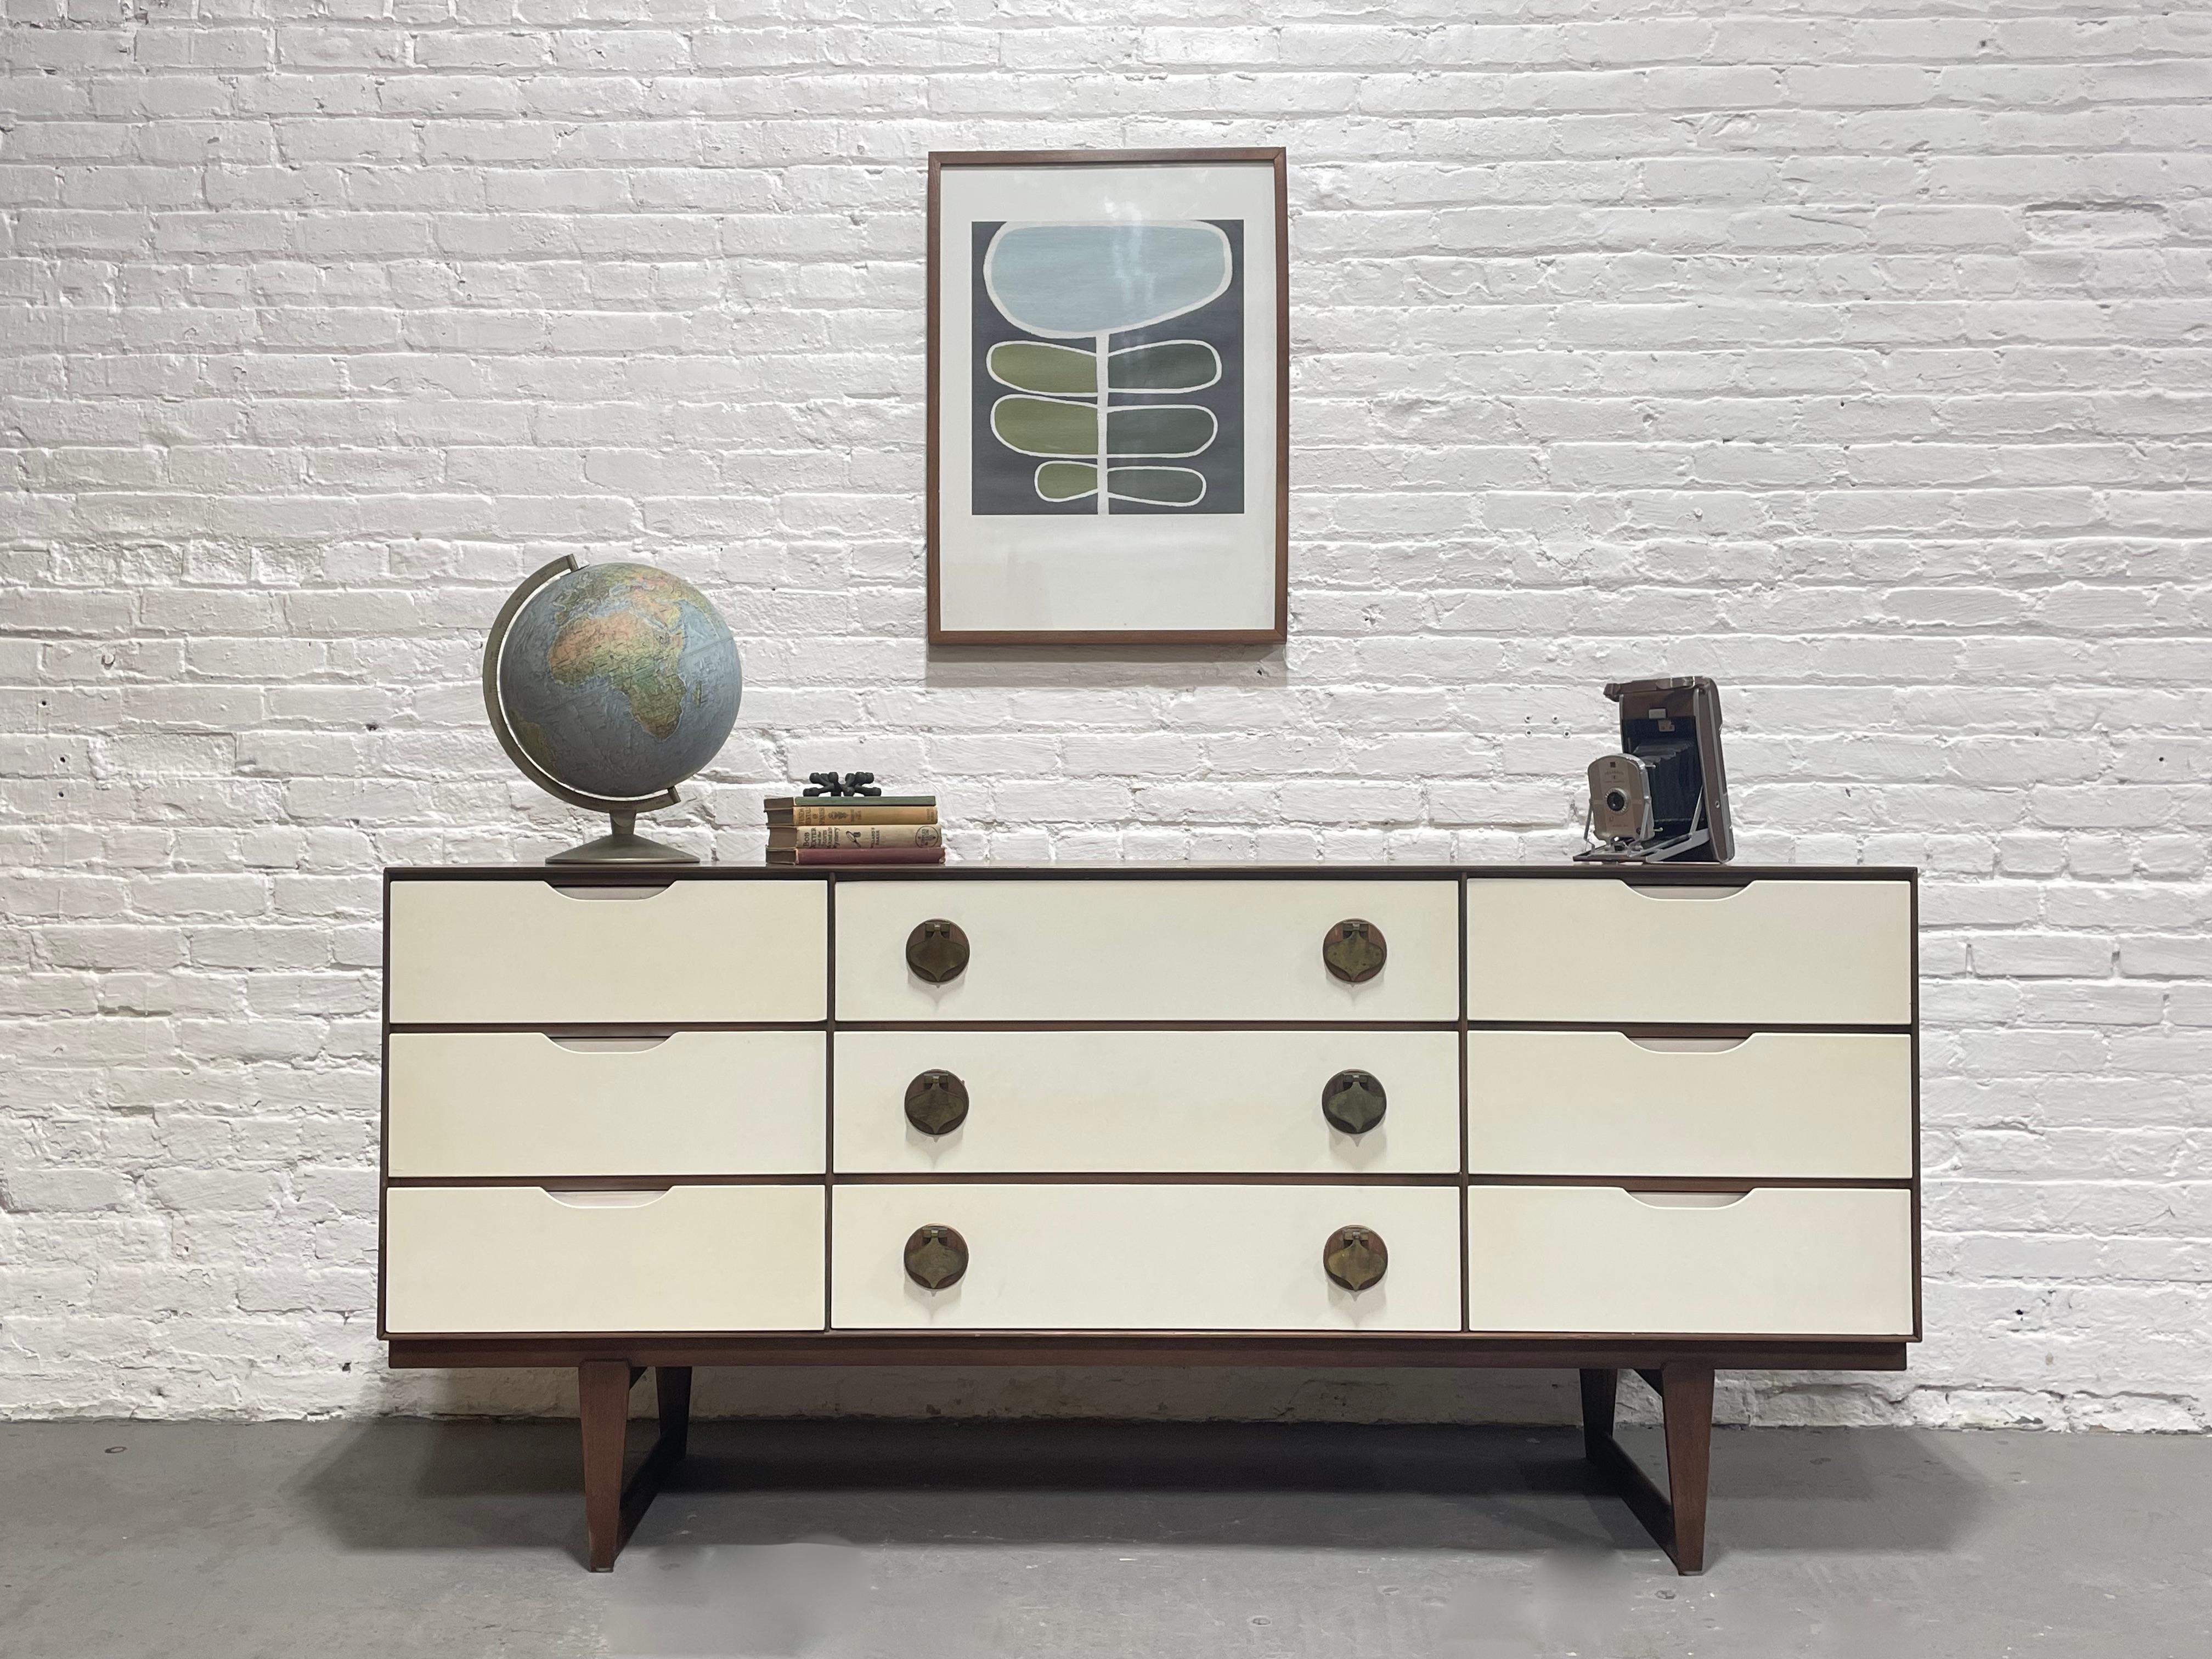 Rare + Original Mid Century Modern White & Walnut Long Dresser by Stanley Furniture Co., c. 1960's. This elusive series was in limited production and is incredibly hard to find. The dresser is highlighted by solid brass spade pulls over solid walnut